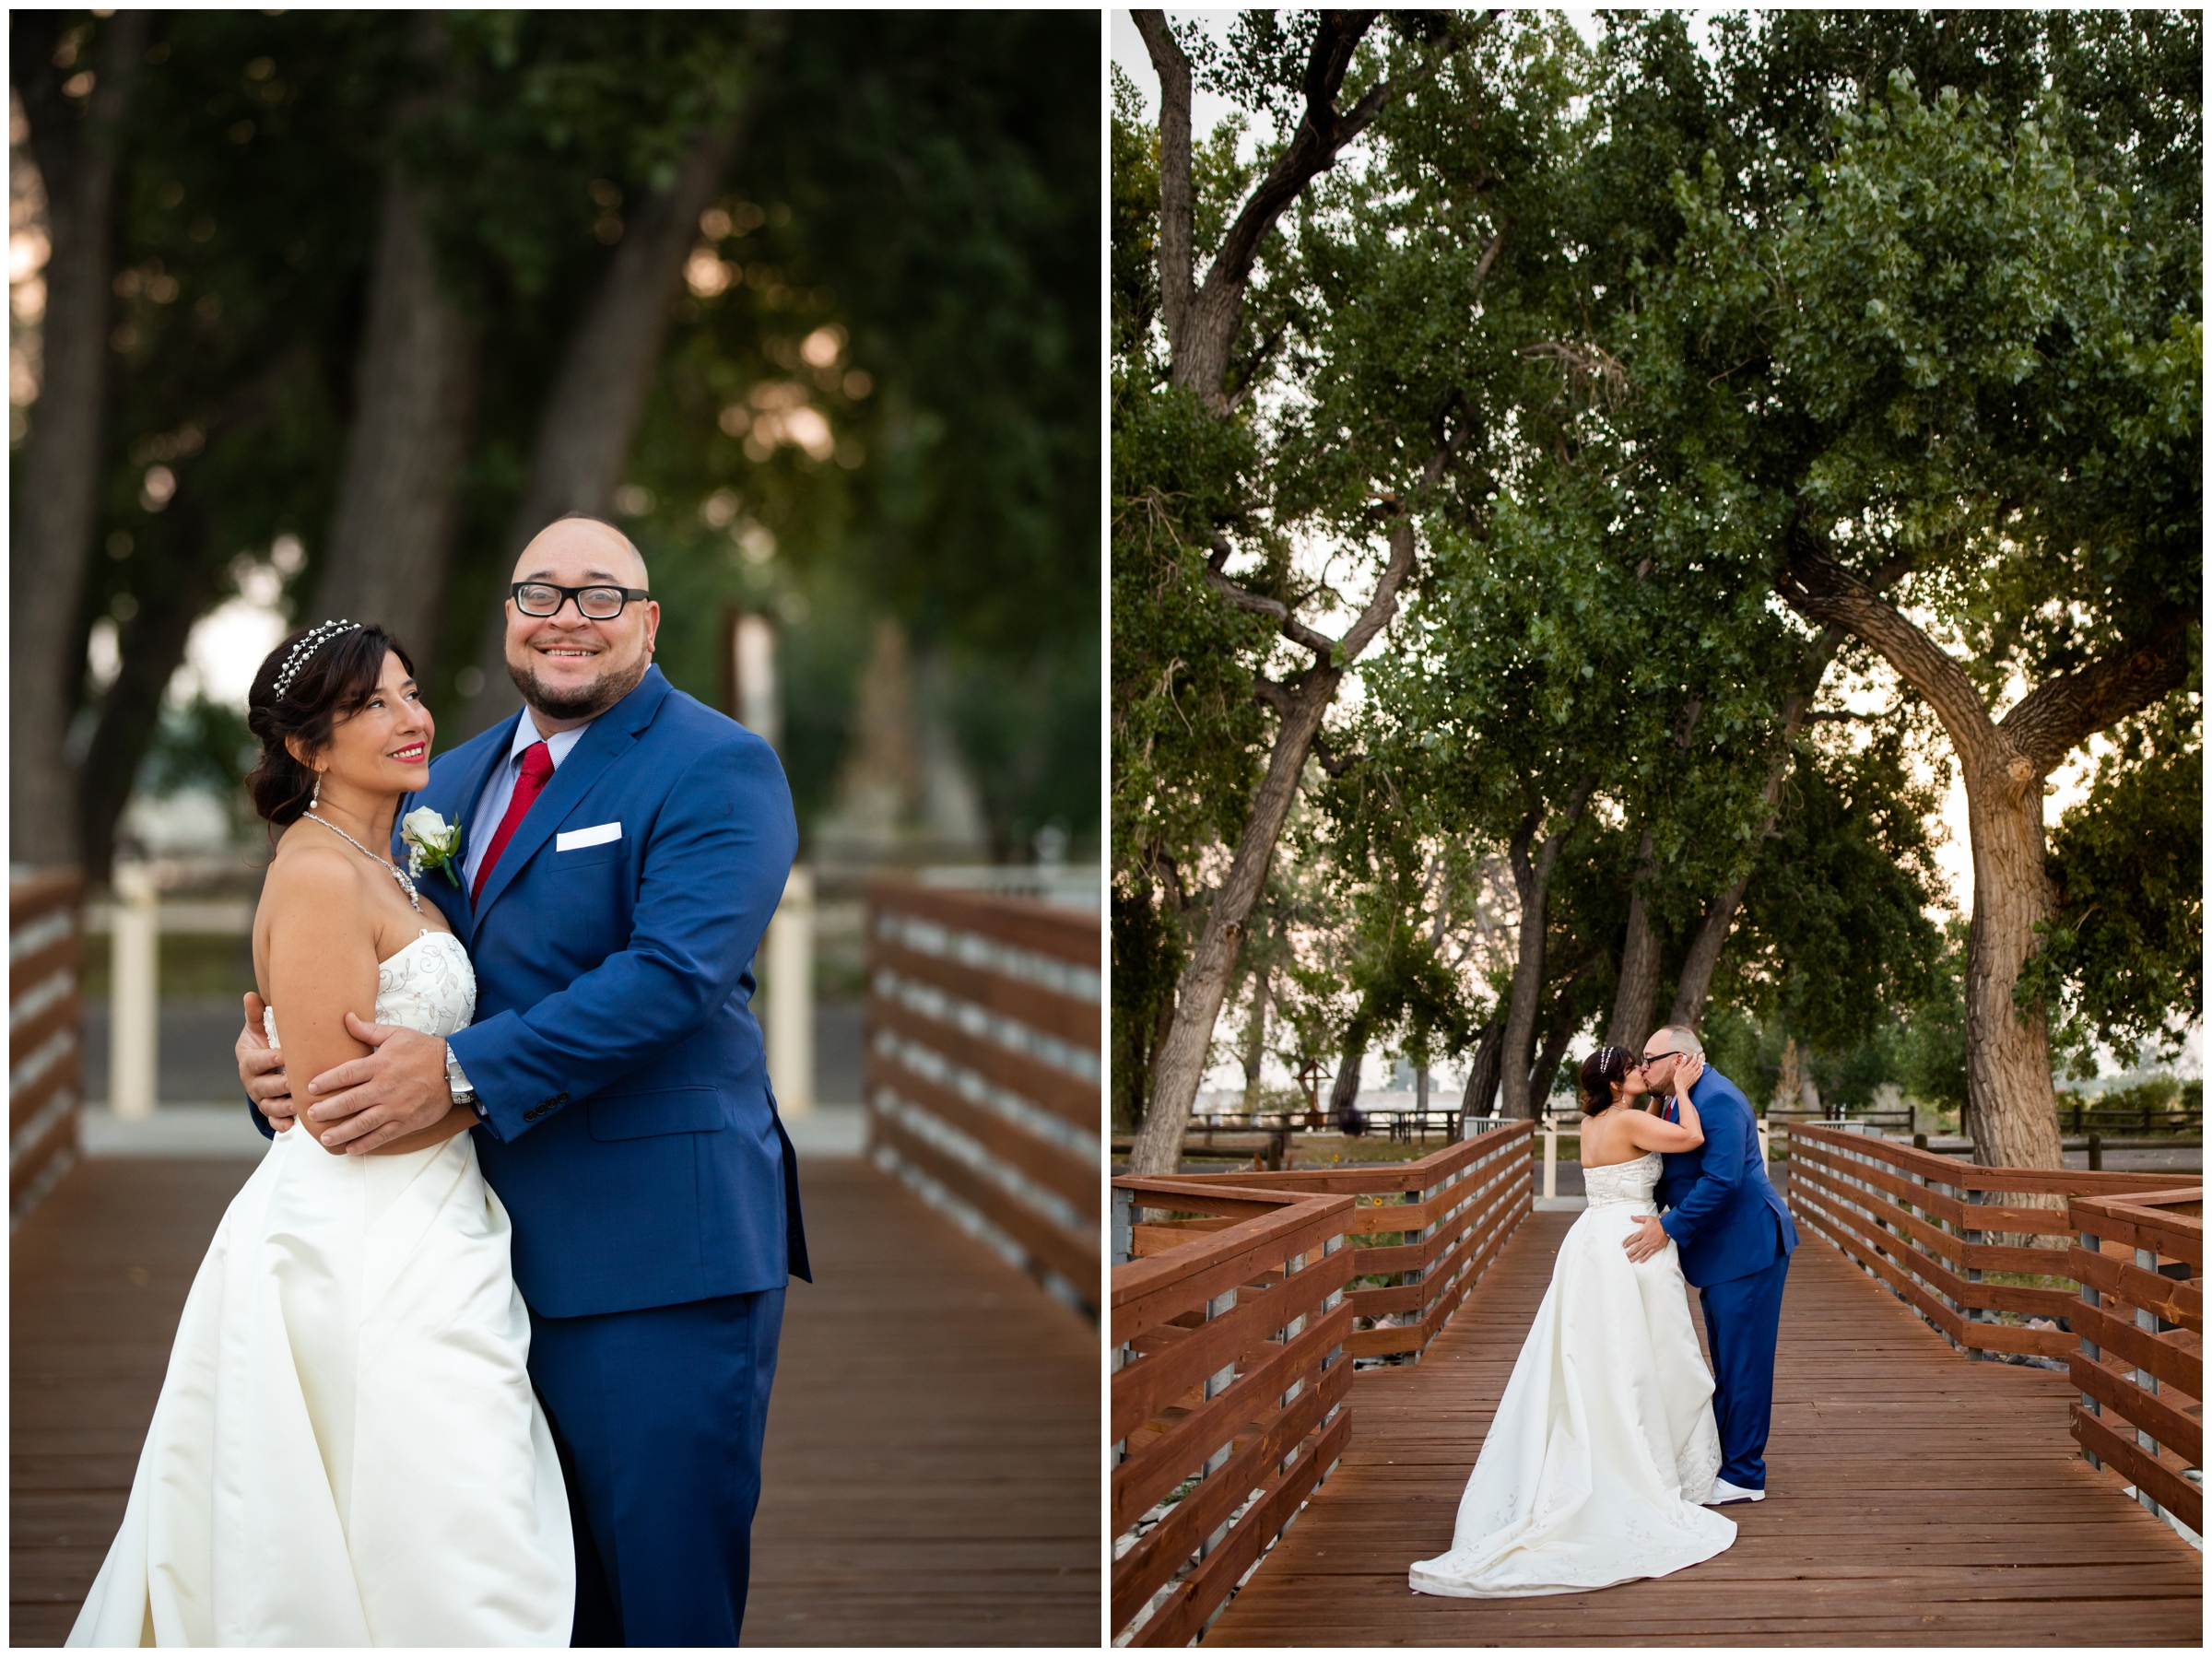 Barr Lake State Park wedding photos at sunrise by Colorado photographer Plum Pretty Photography